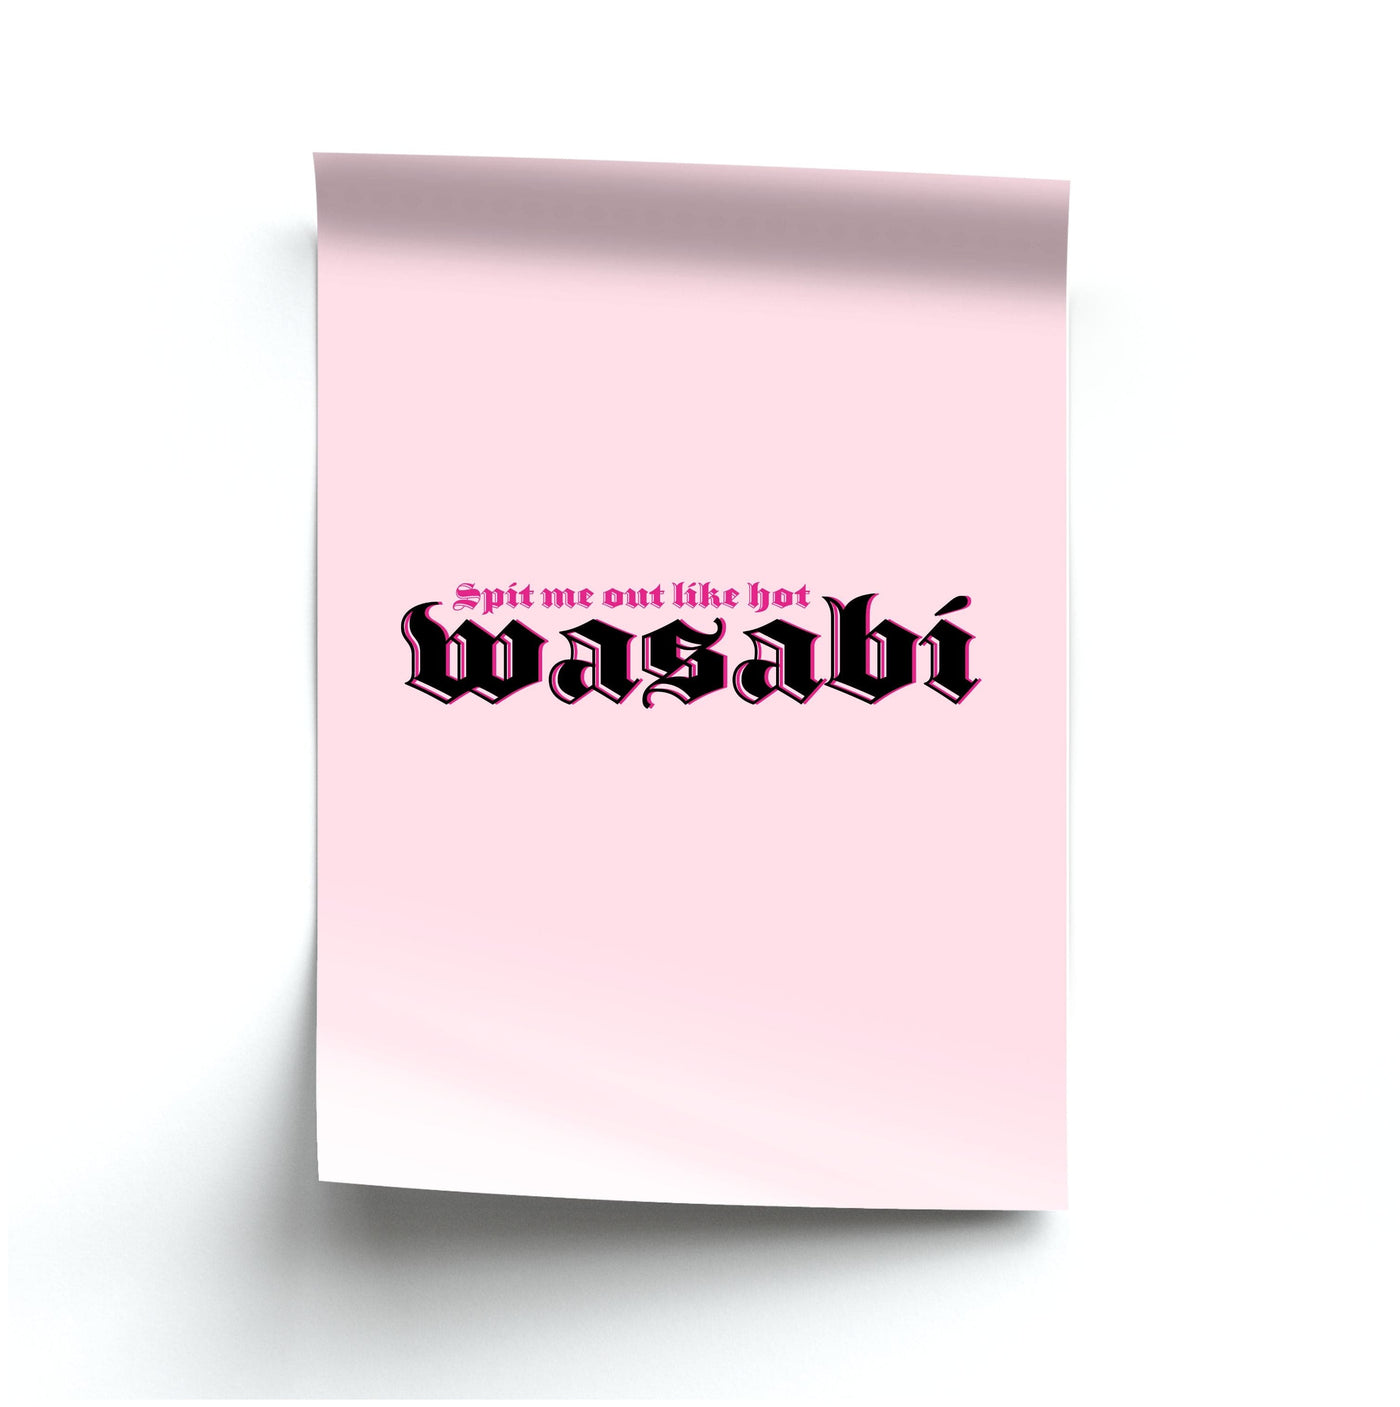 Wasabi Quote - Little Mix Poster